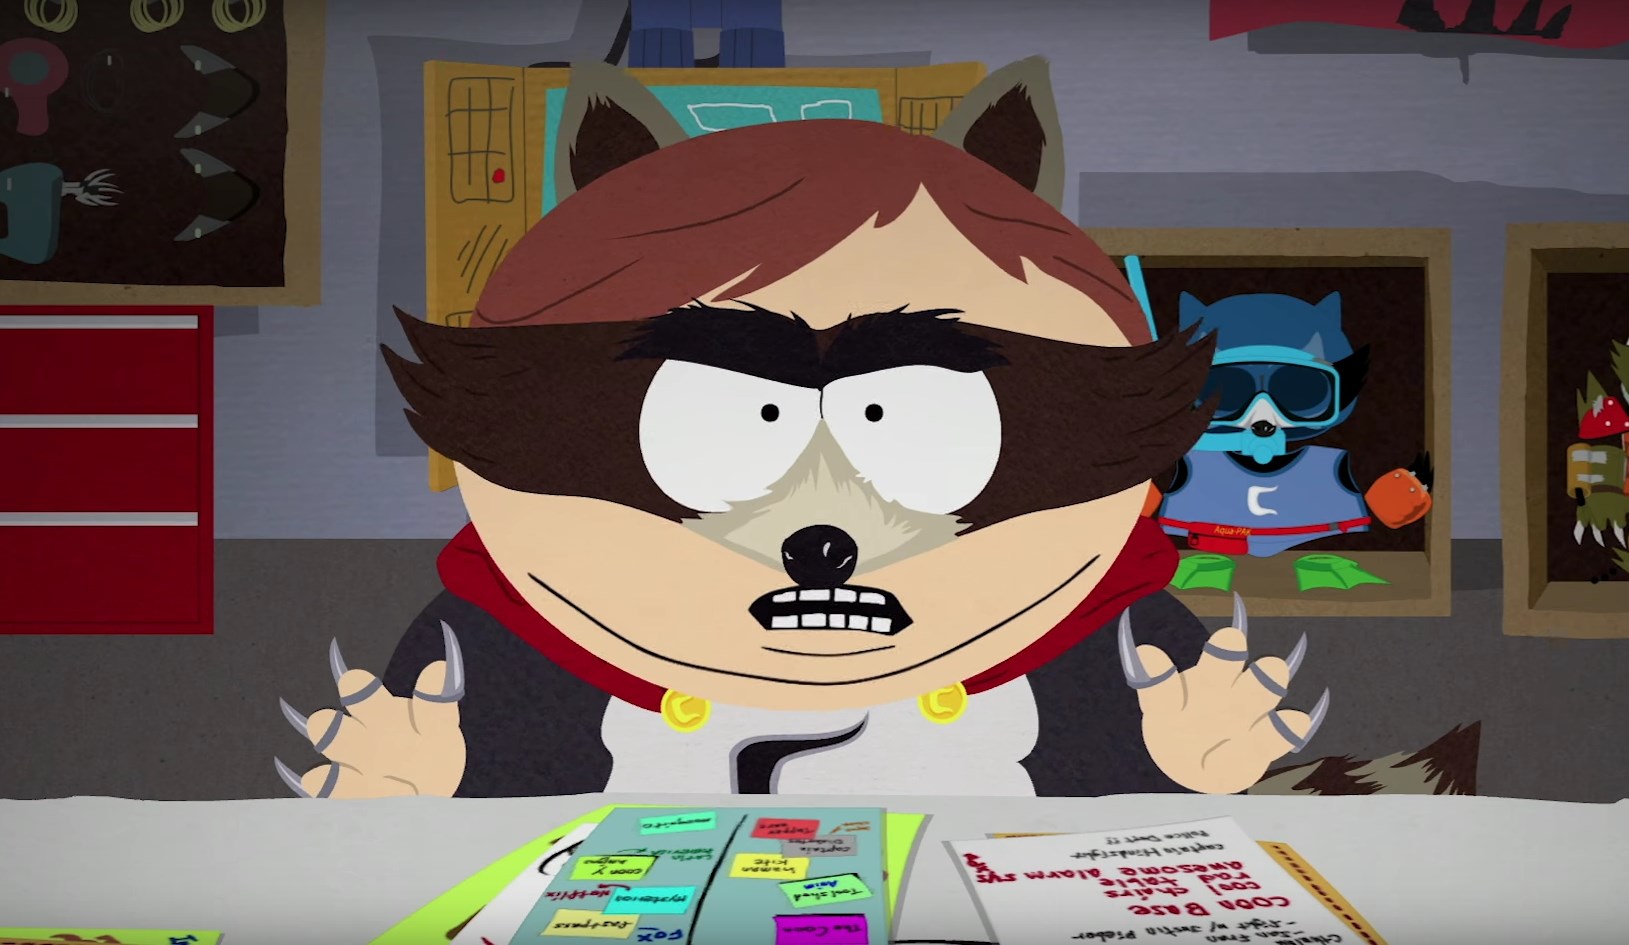 South Park is getting a new game next year, and it's in 3D